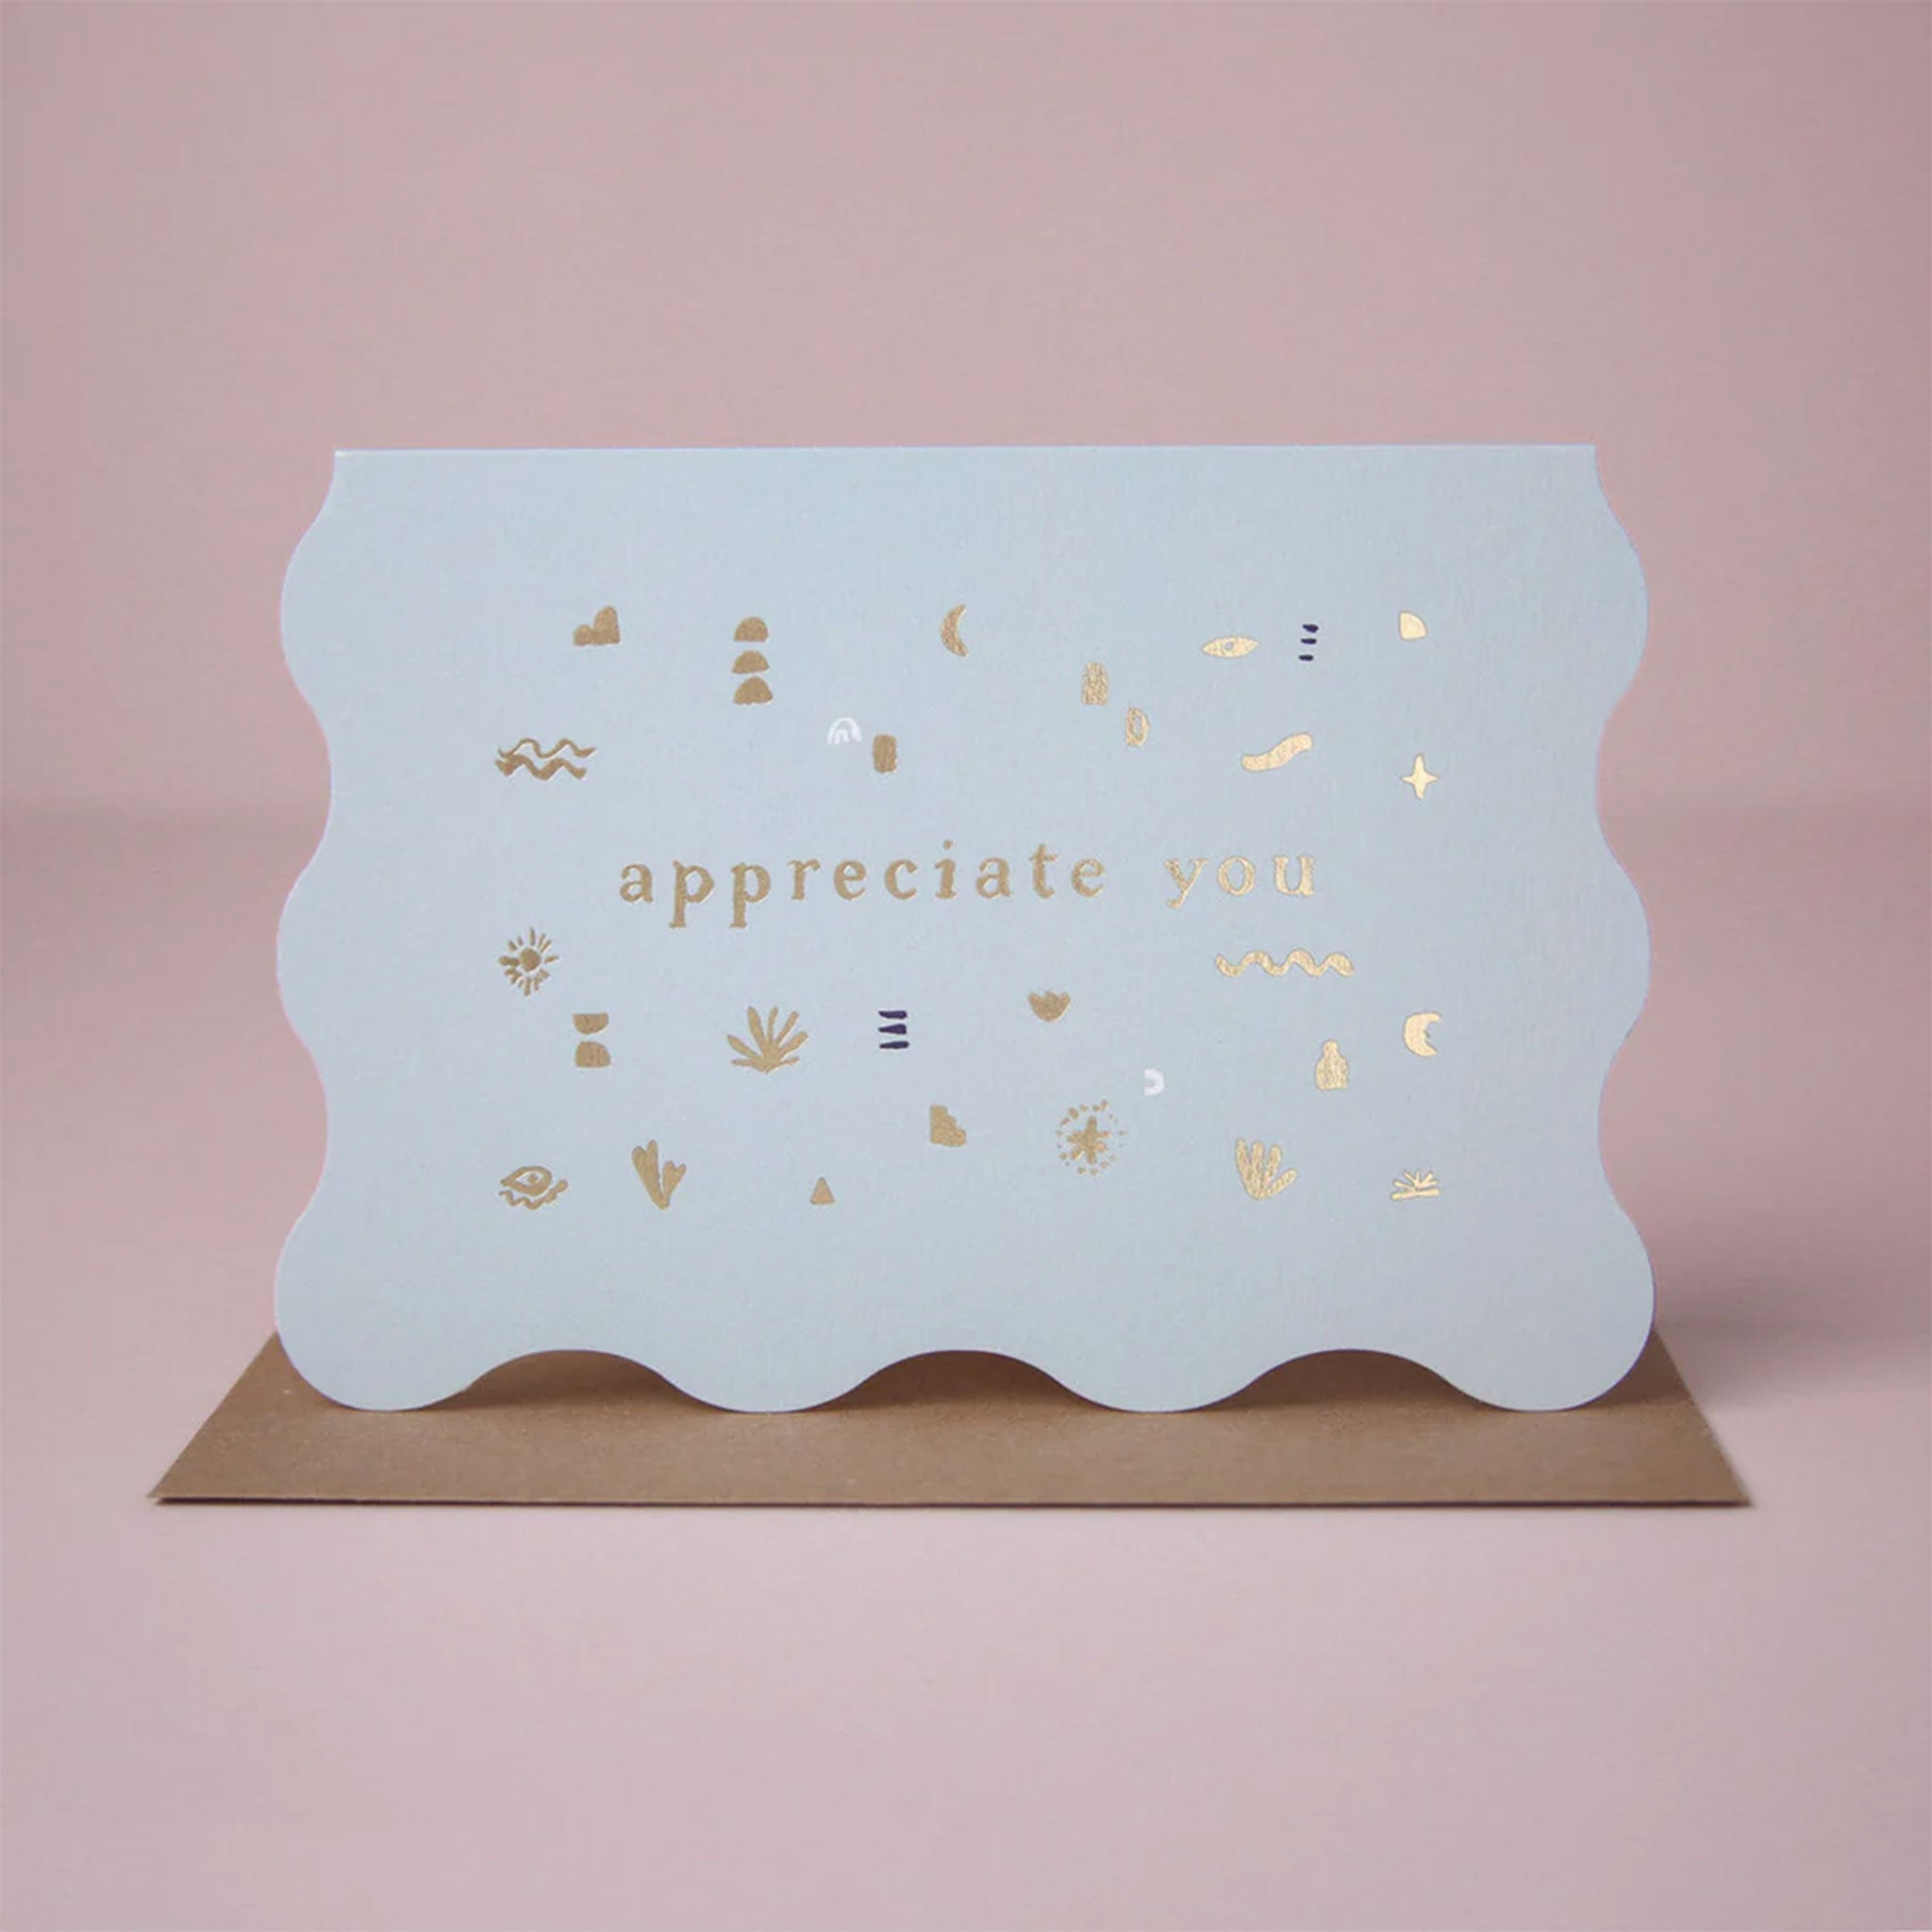 On a pink background is a light blue wavy card with gold foiled text that reads, "appreciate you". 